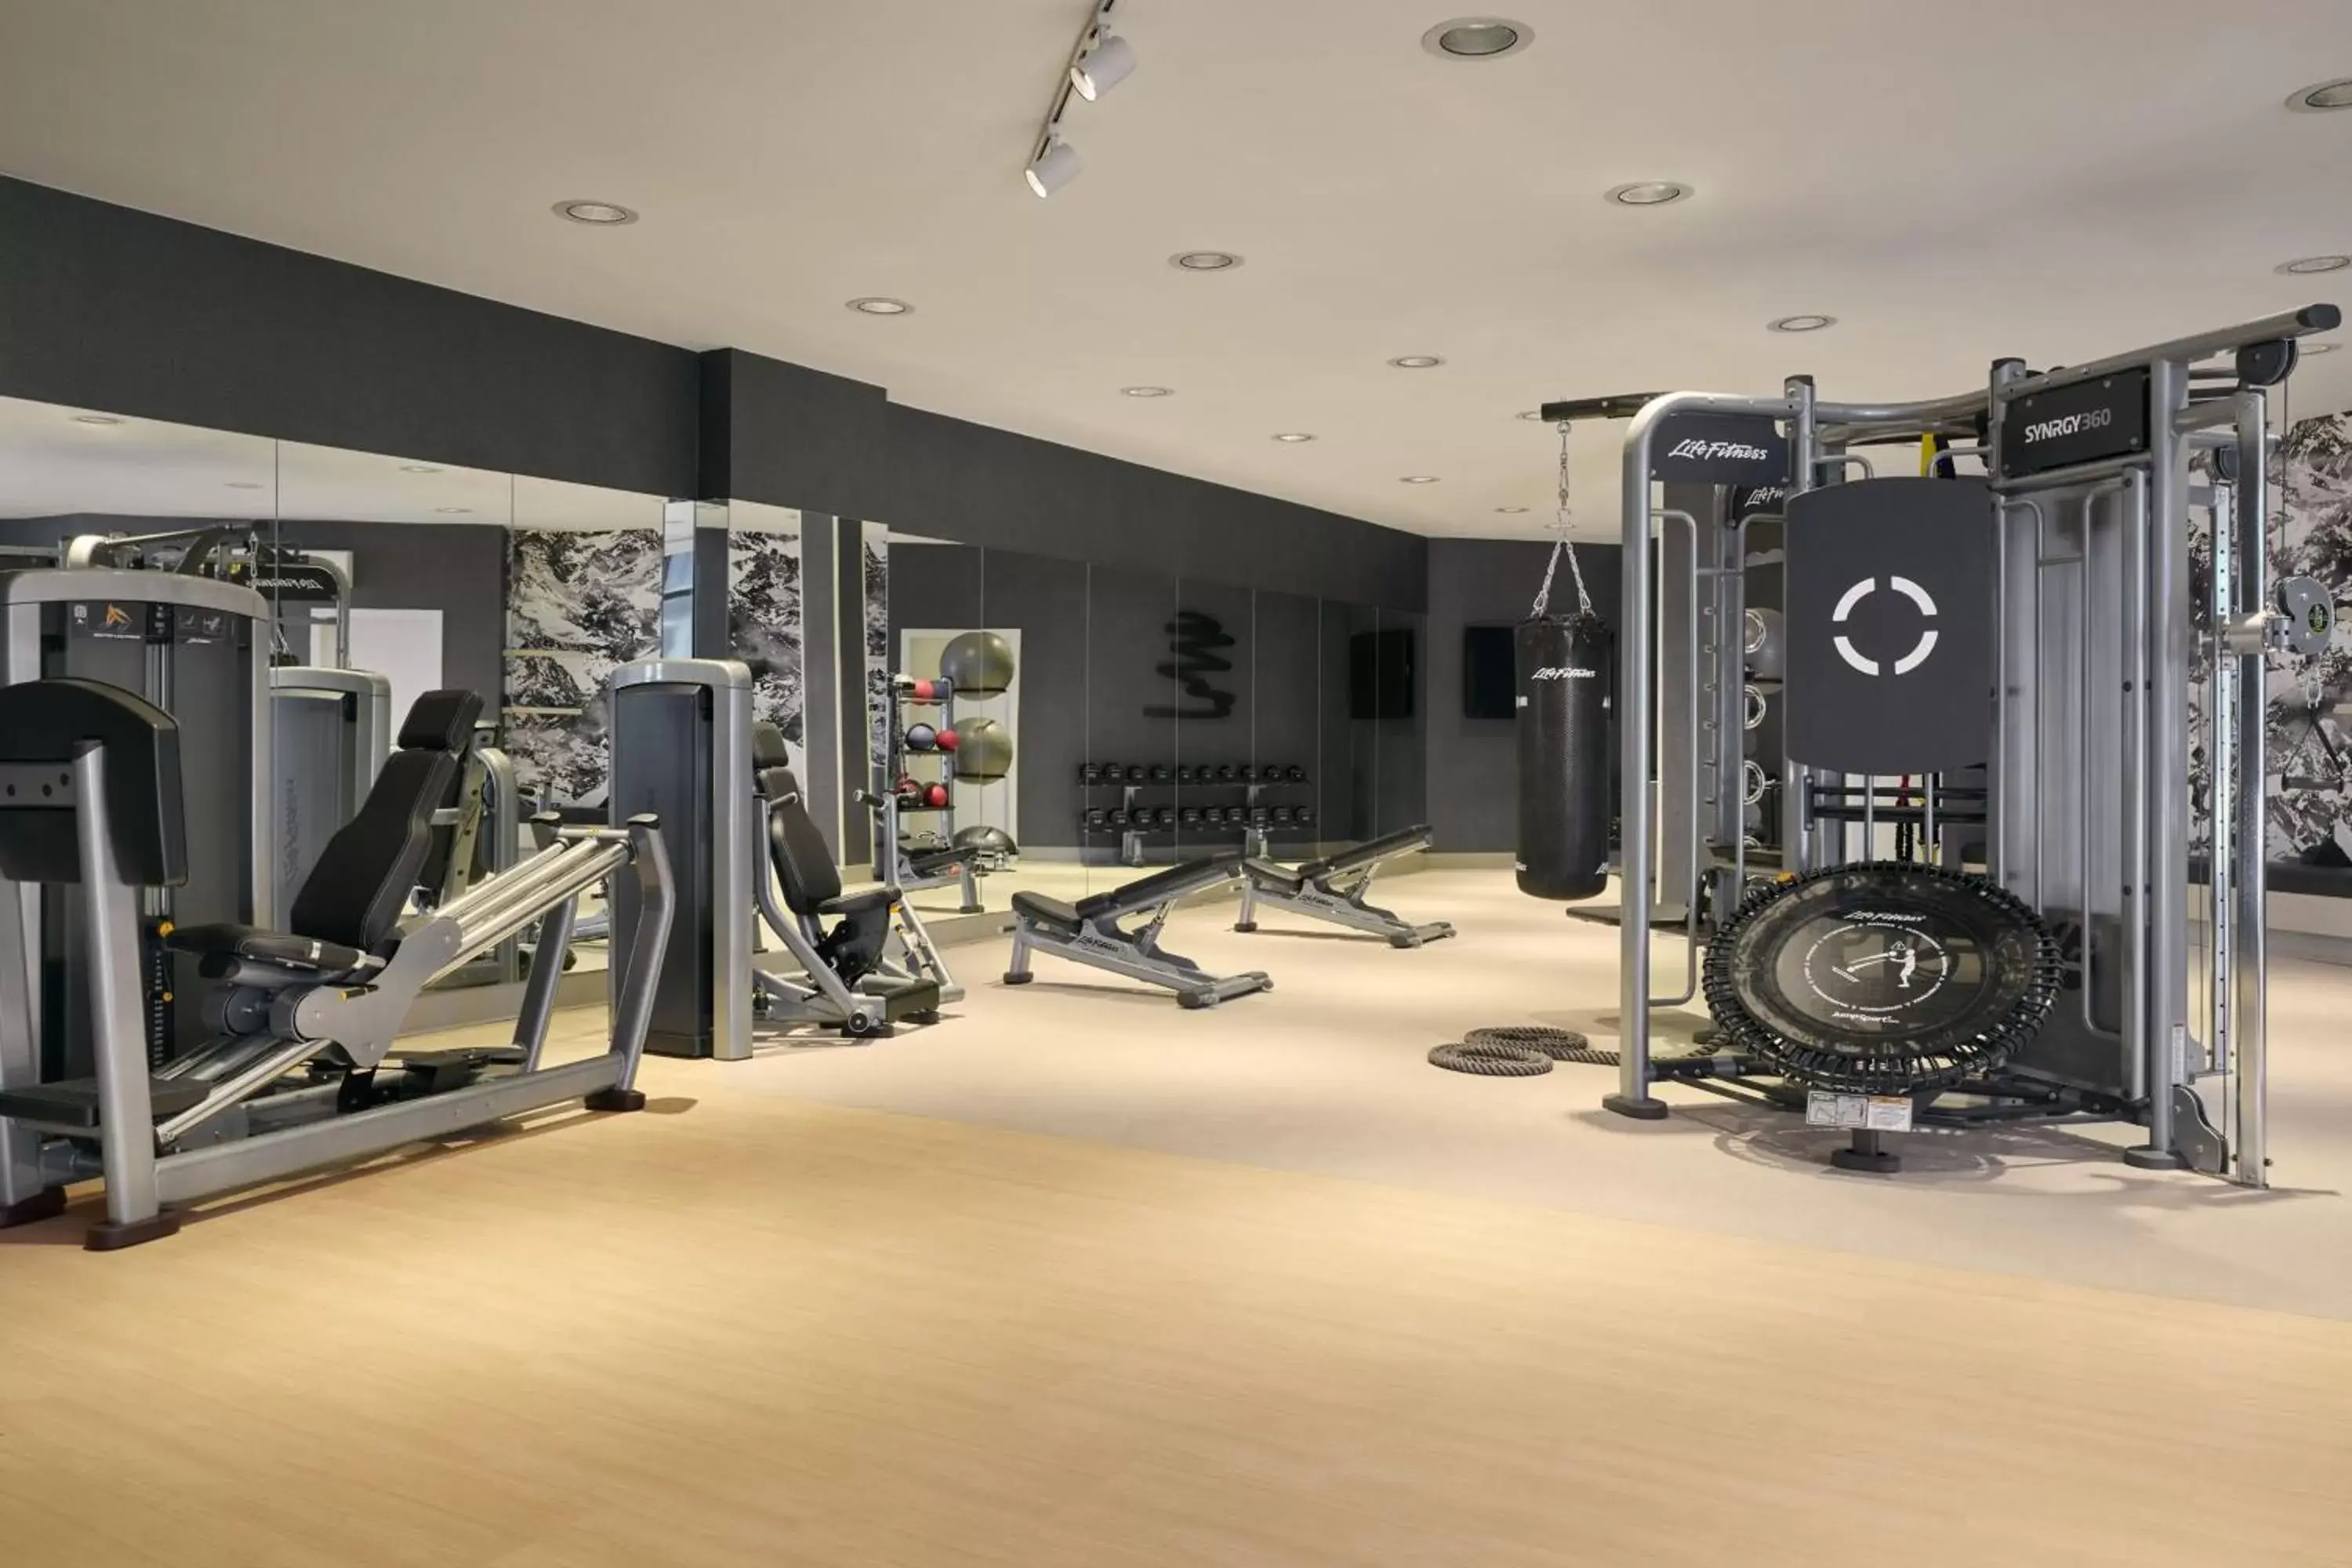 Fitness centre/facilities, Fitness Center/Facilities in Viewline Resort Snowmass, Autograph Collection